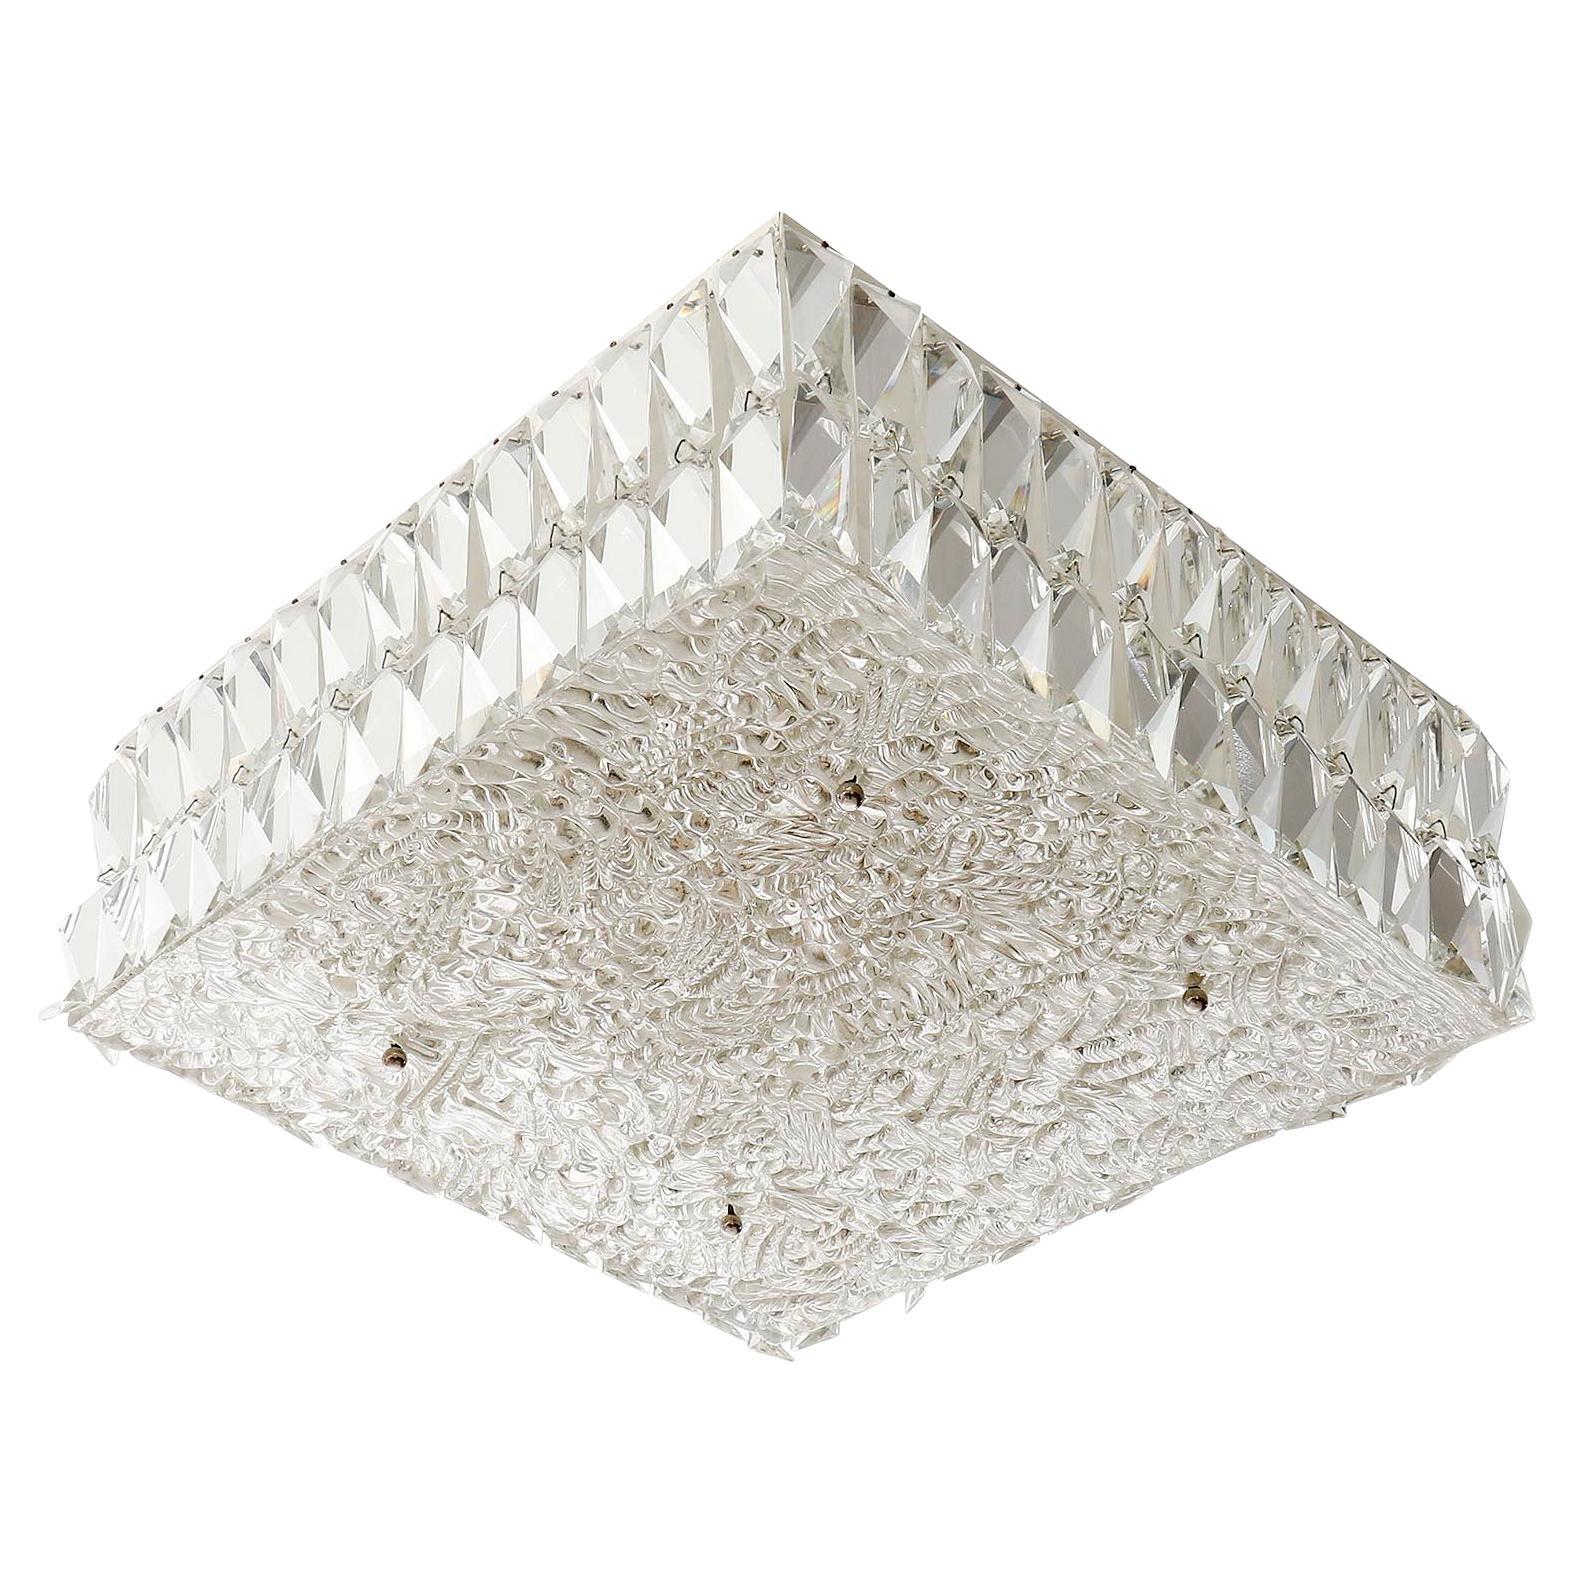 Square Kalmar Flush Mount Light Fixture, Textured and Crystal Glass, 1960s For Sale